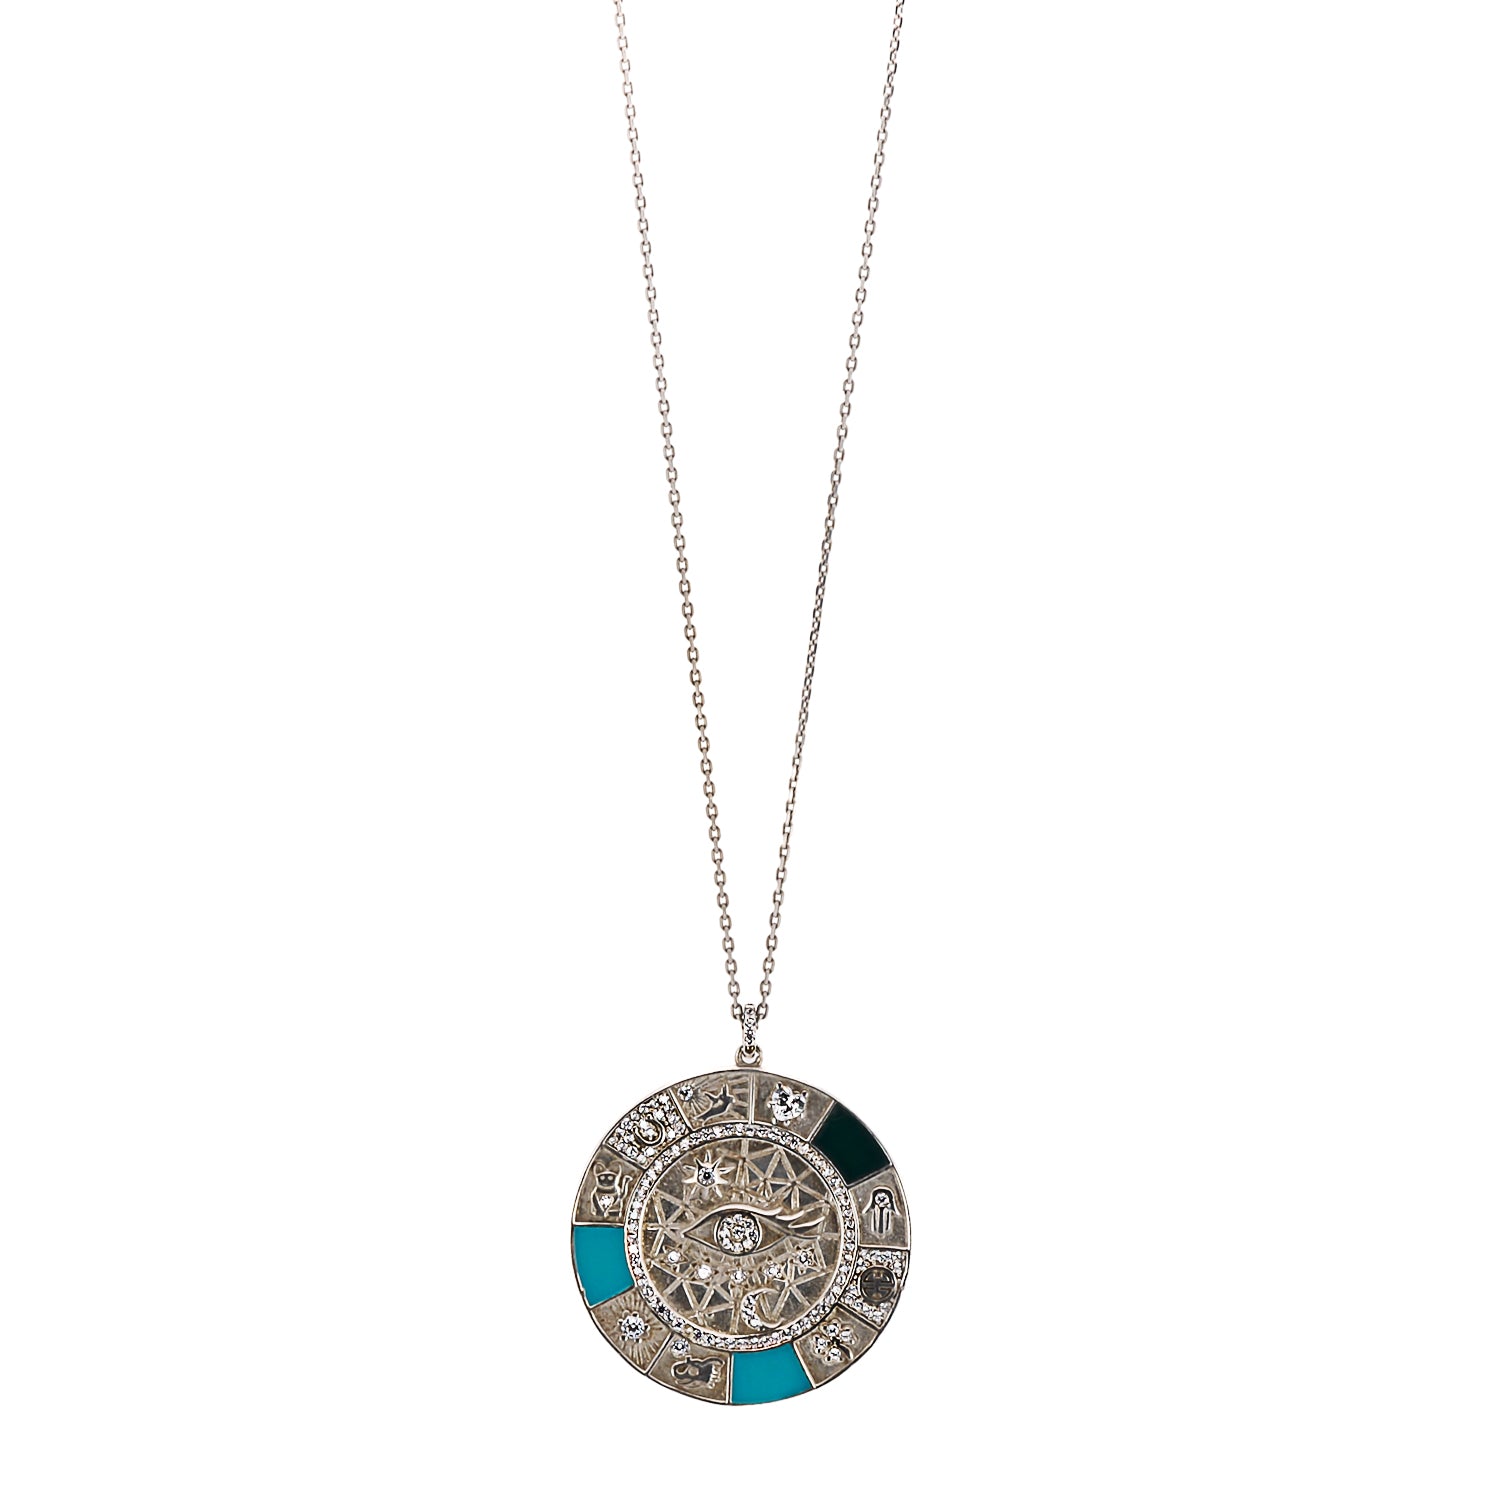 The Magic Blessings Necklace: A stunning display of symbols and sparkling zircon stones, radiating positive energy and protection.